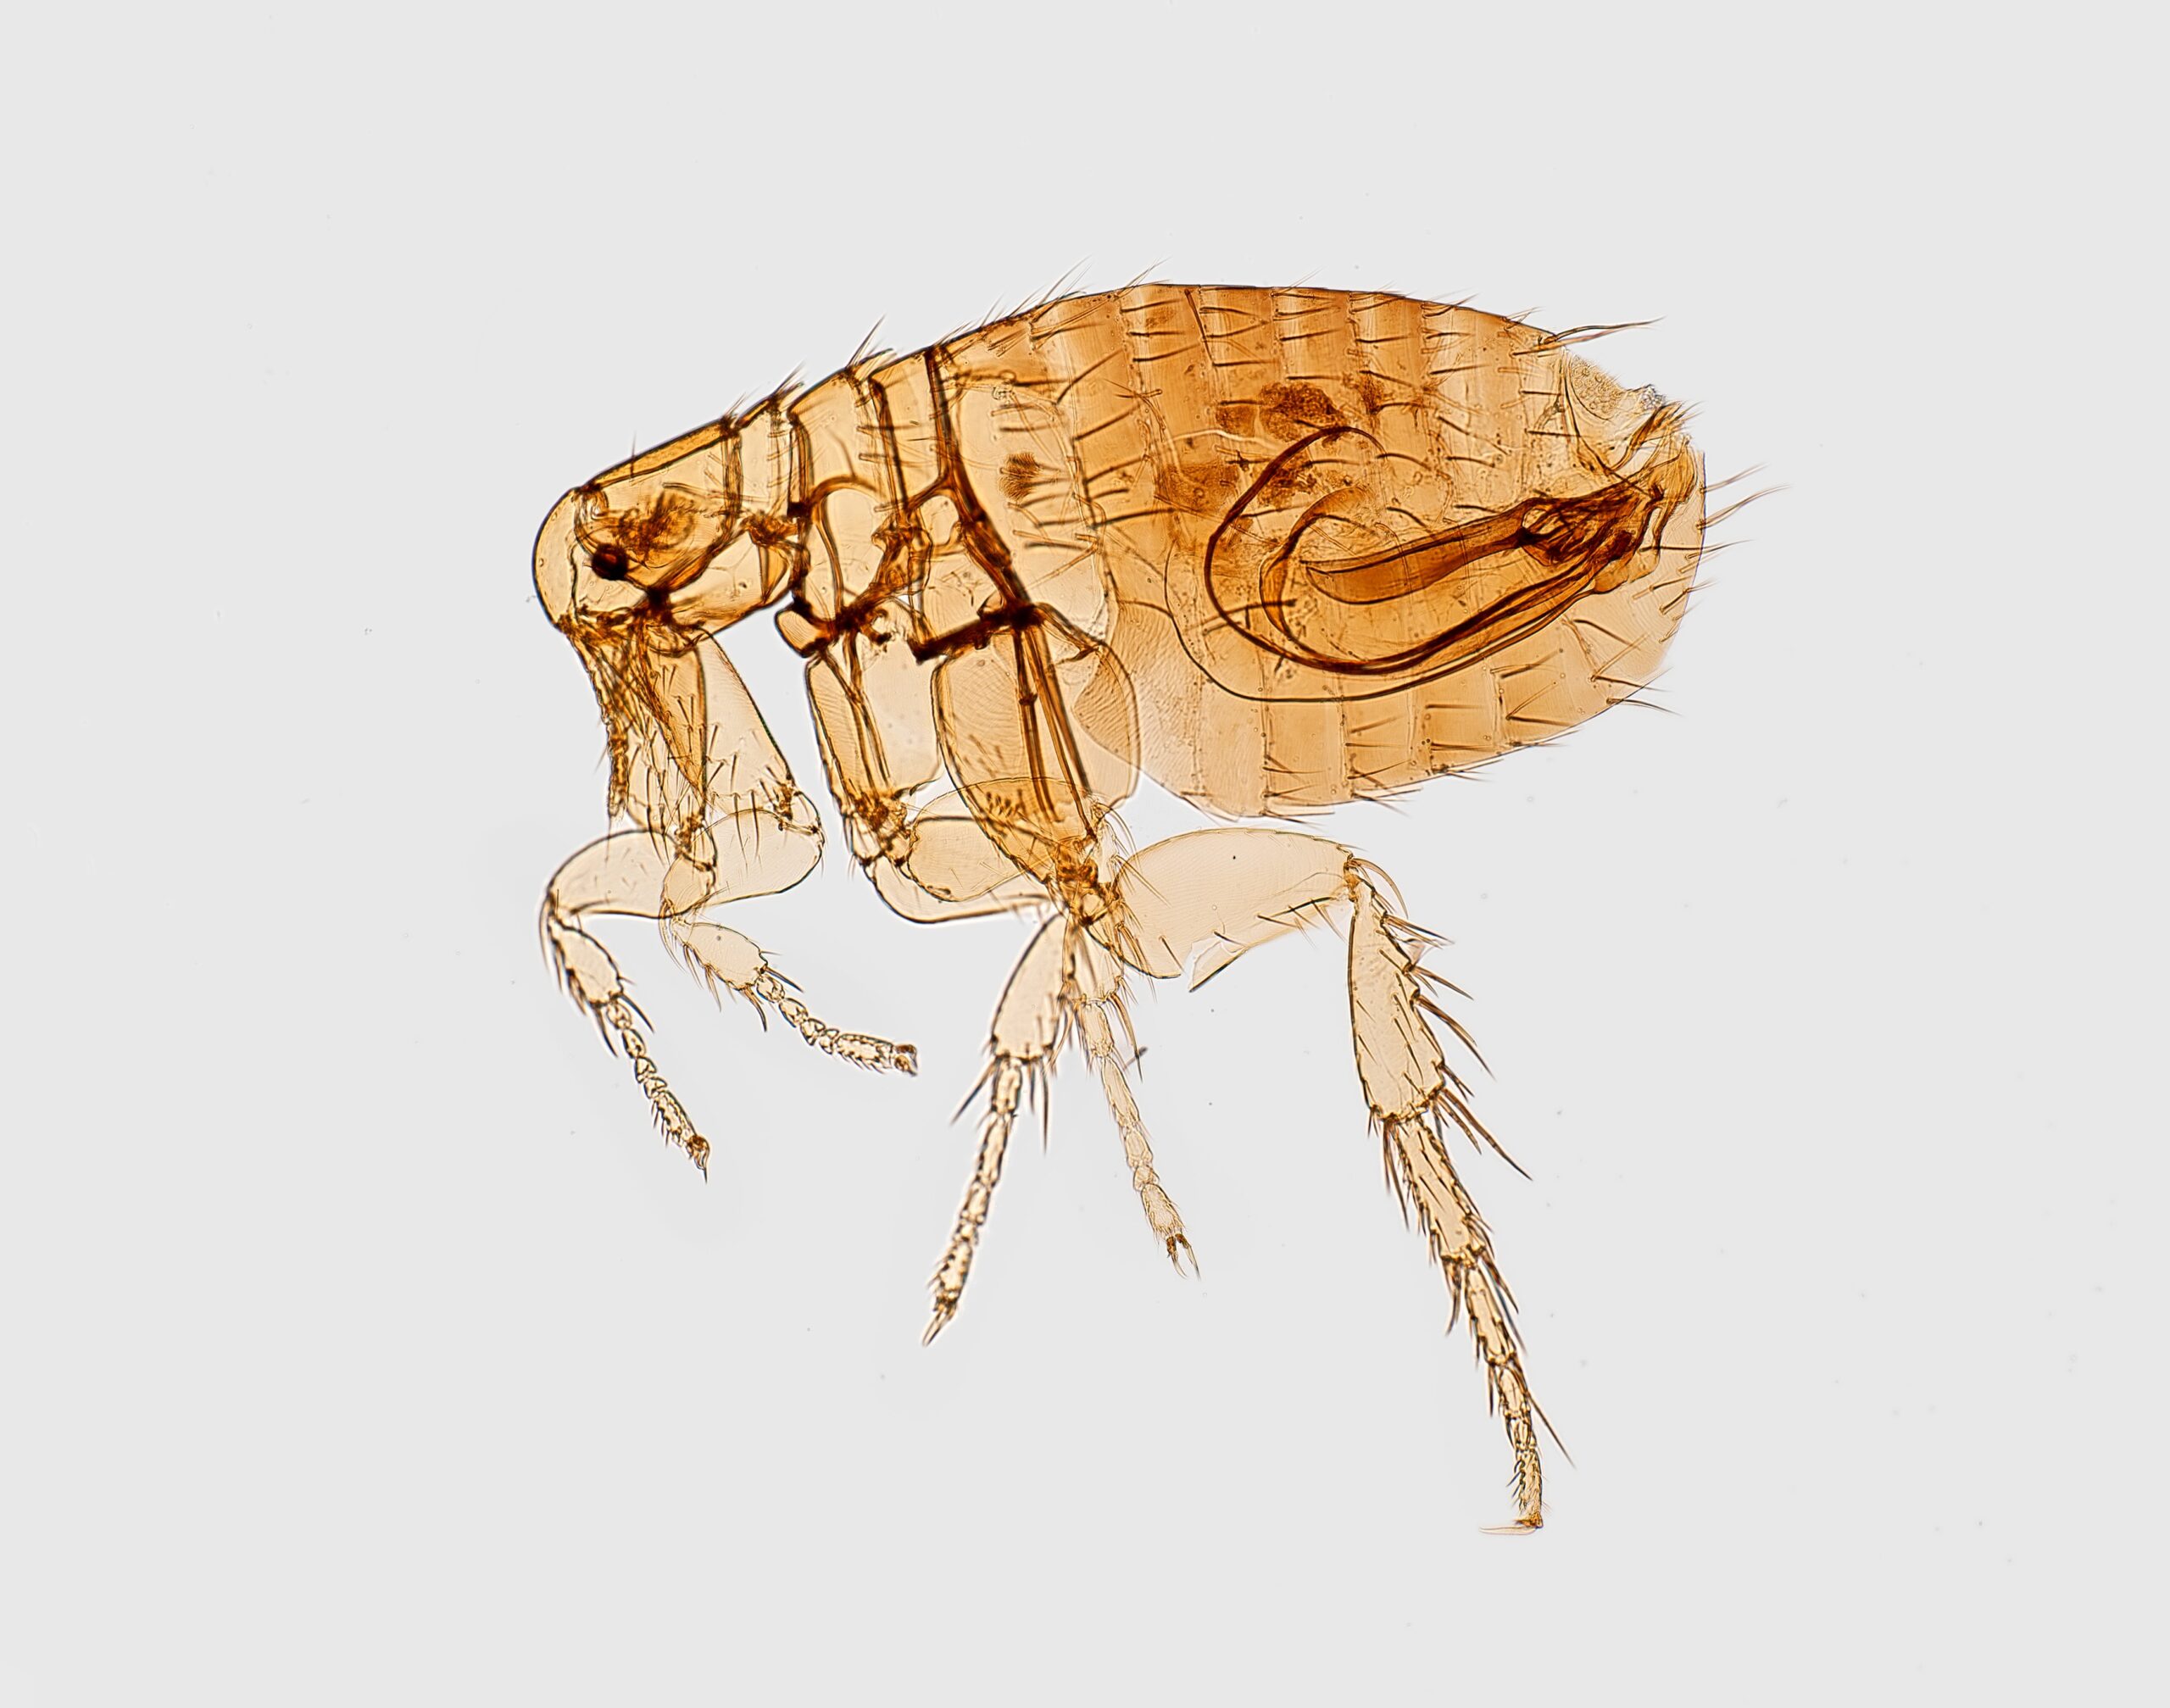 How to Get Rid of Fleas in Your Basement